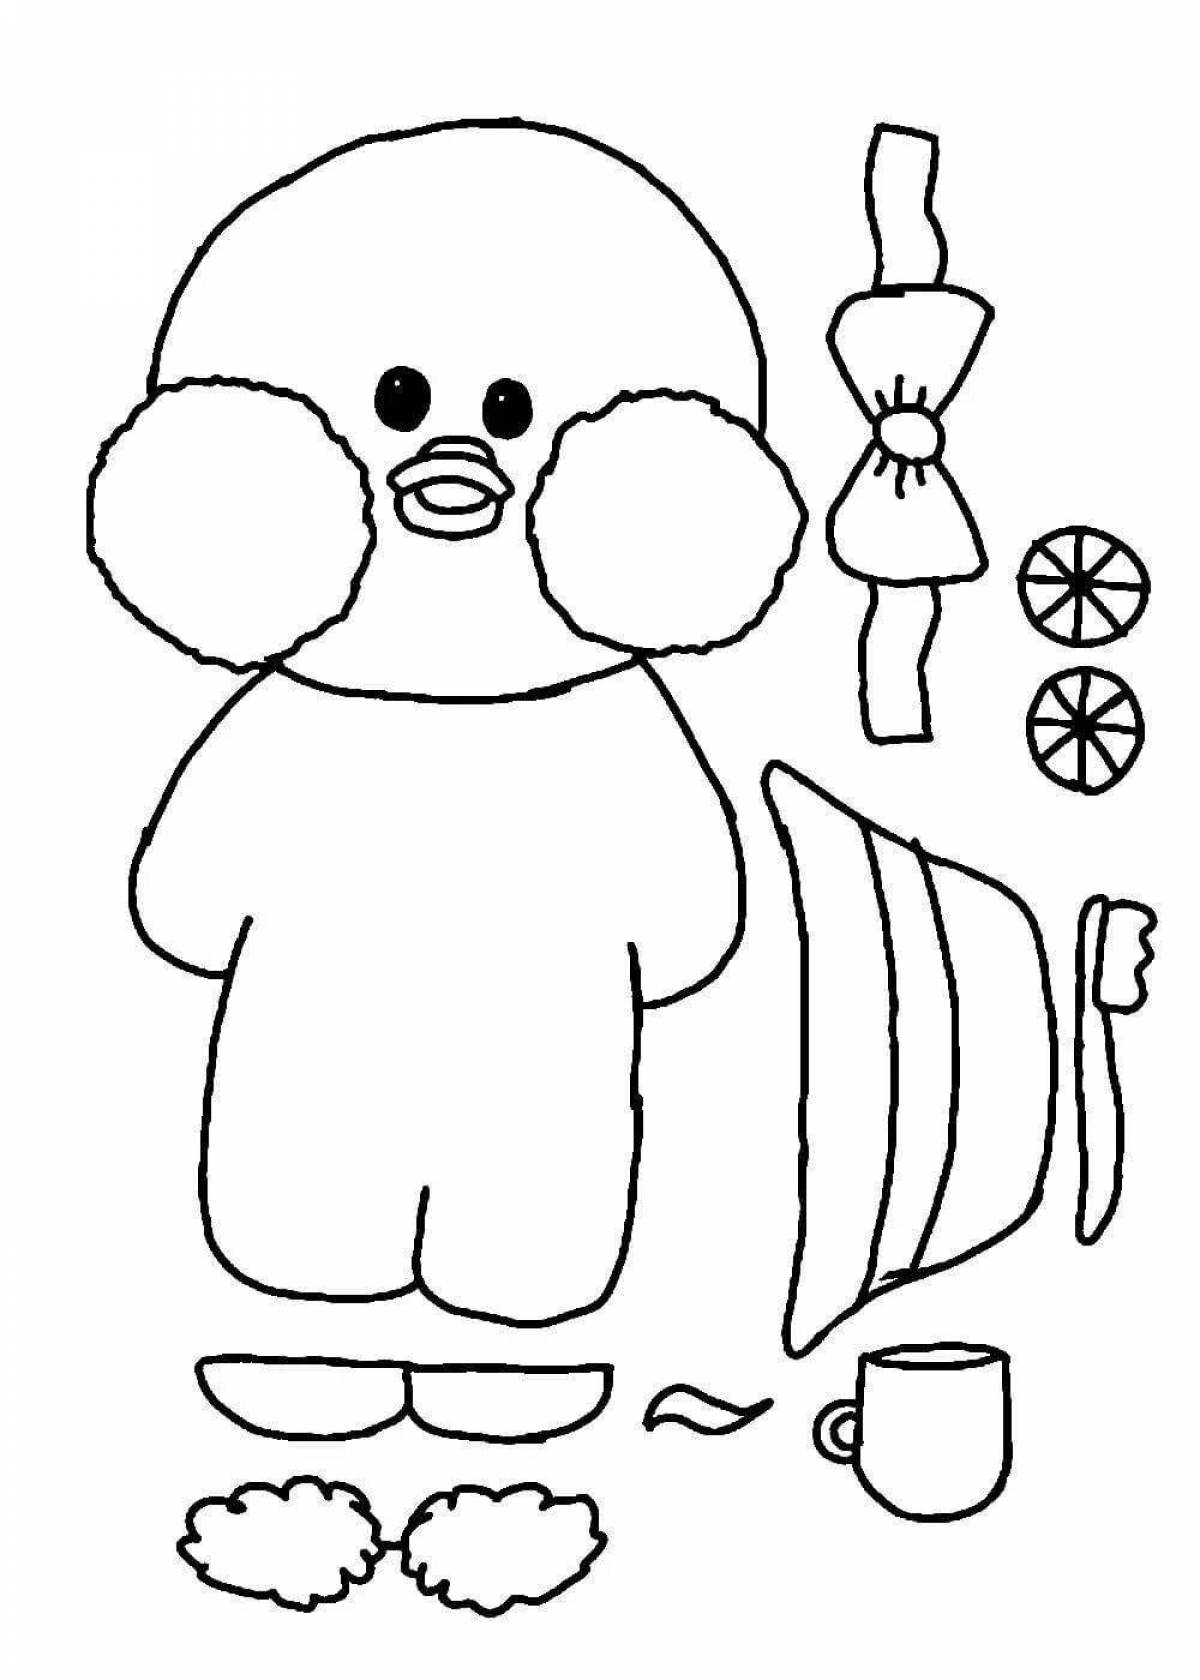 Colorful lala fanfan coloring page